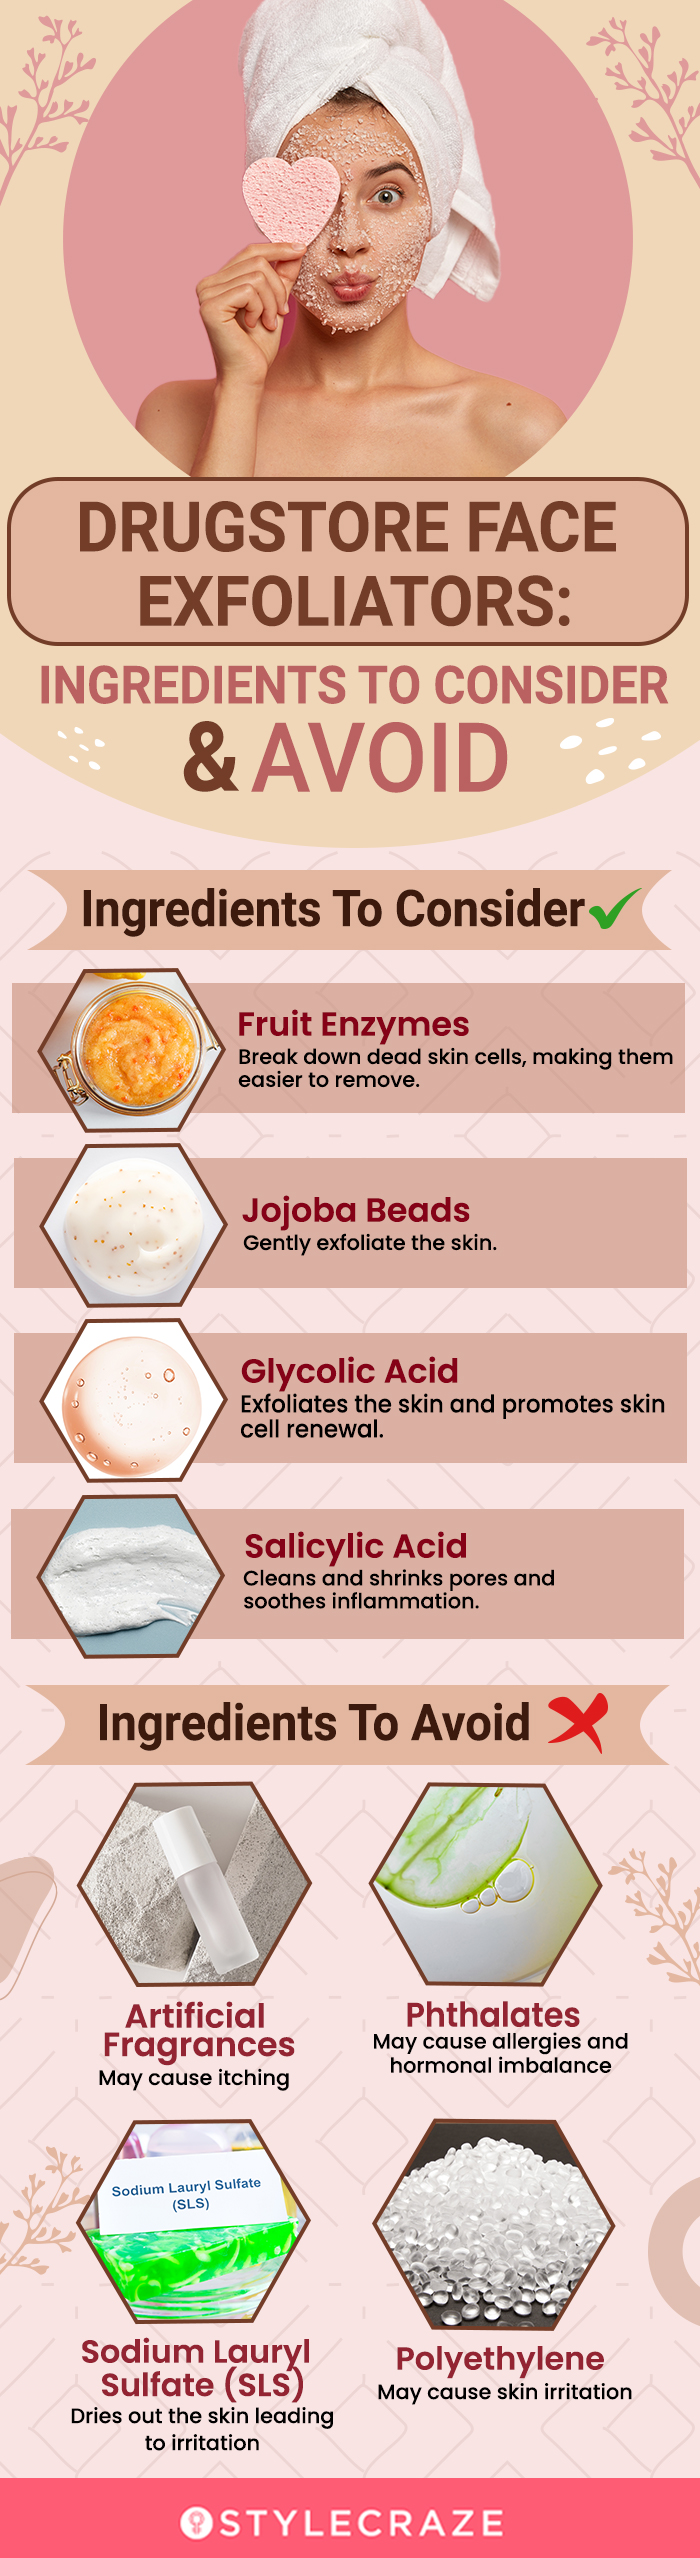 Drugstore Face Exfoliators: Ingredients To Consider & Avoid (infographic)